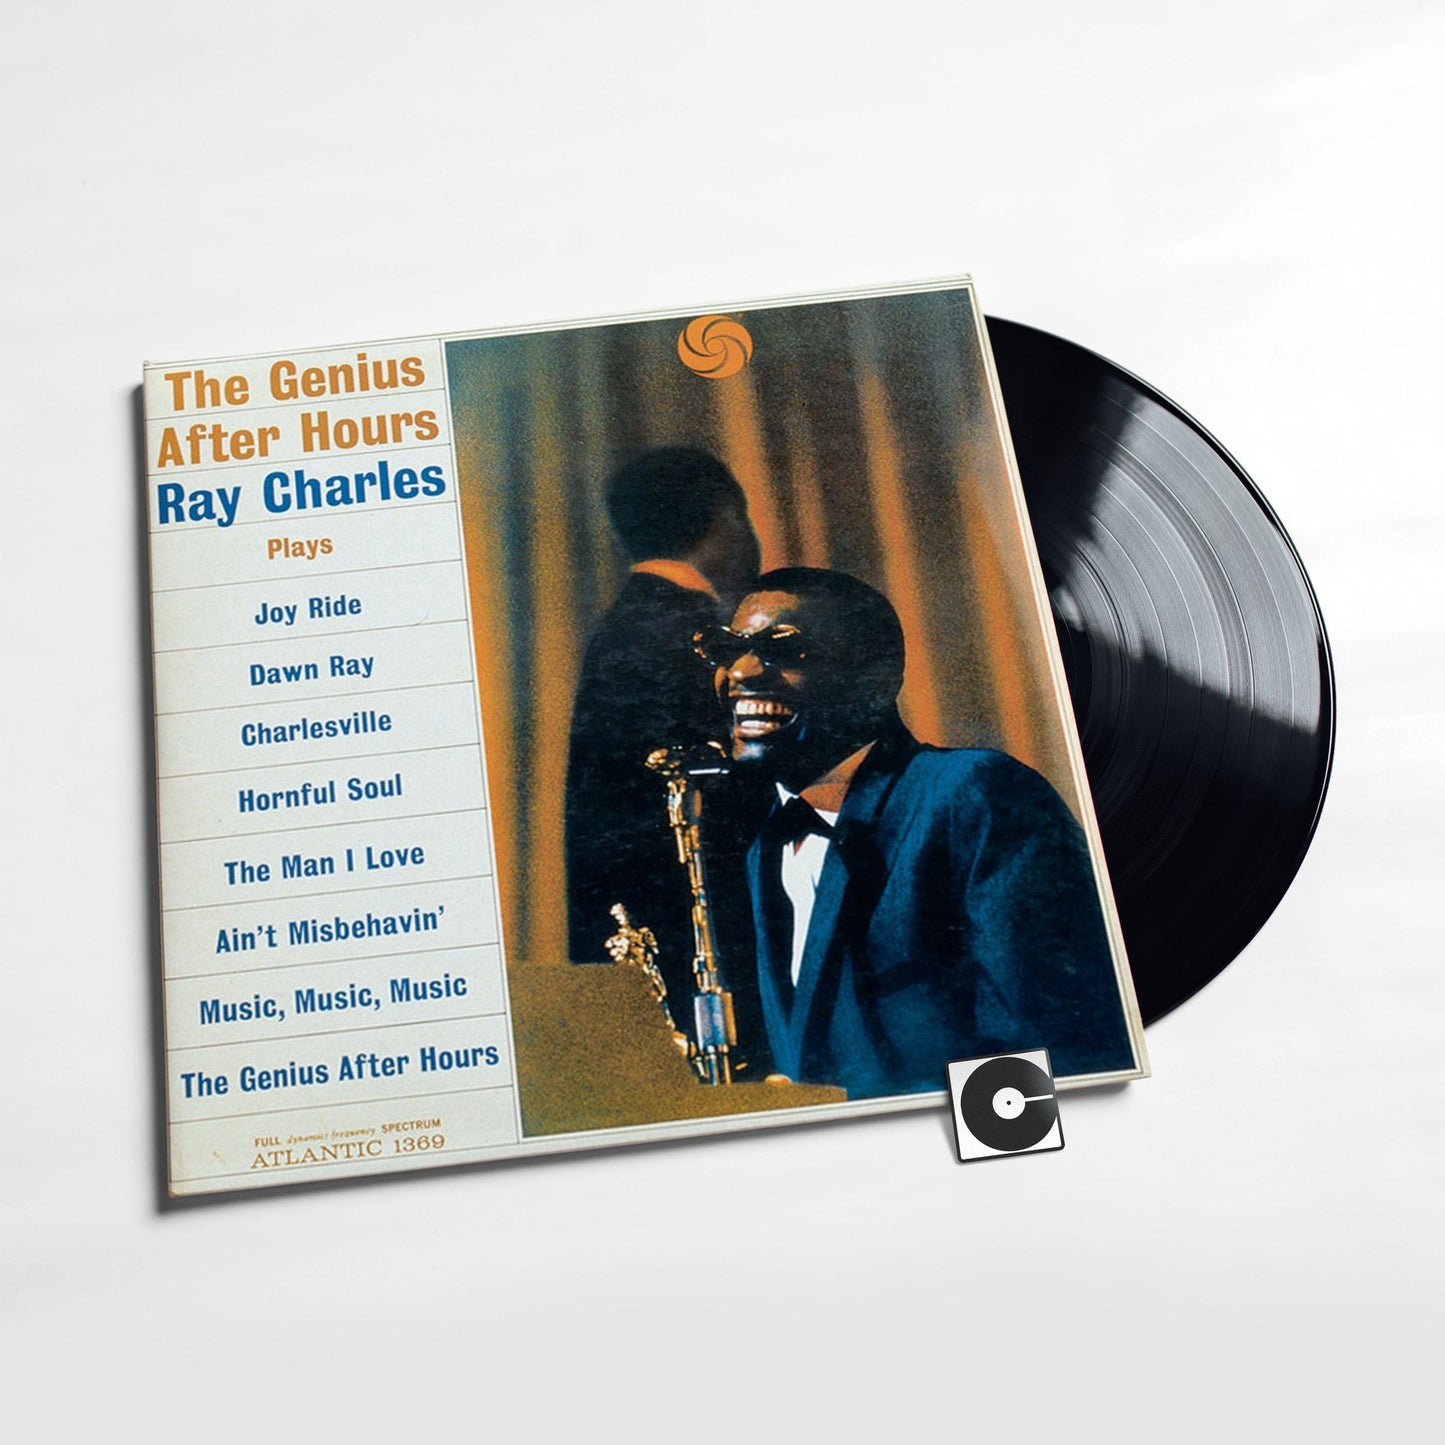 Ray Charles - "The Genius After Hours" Speakers Corner